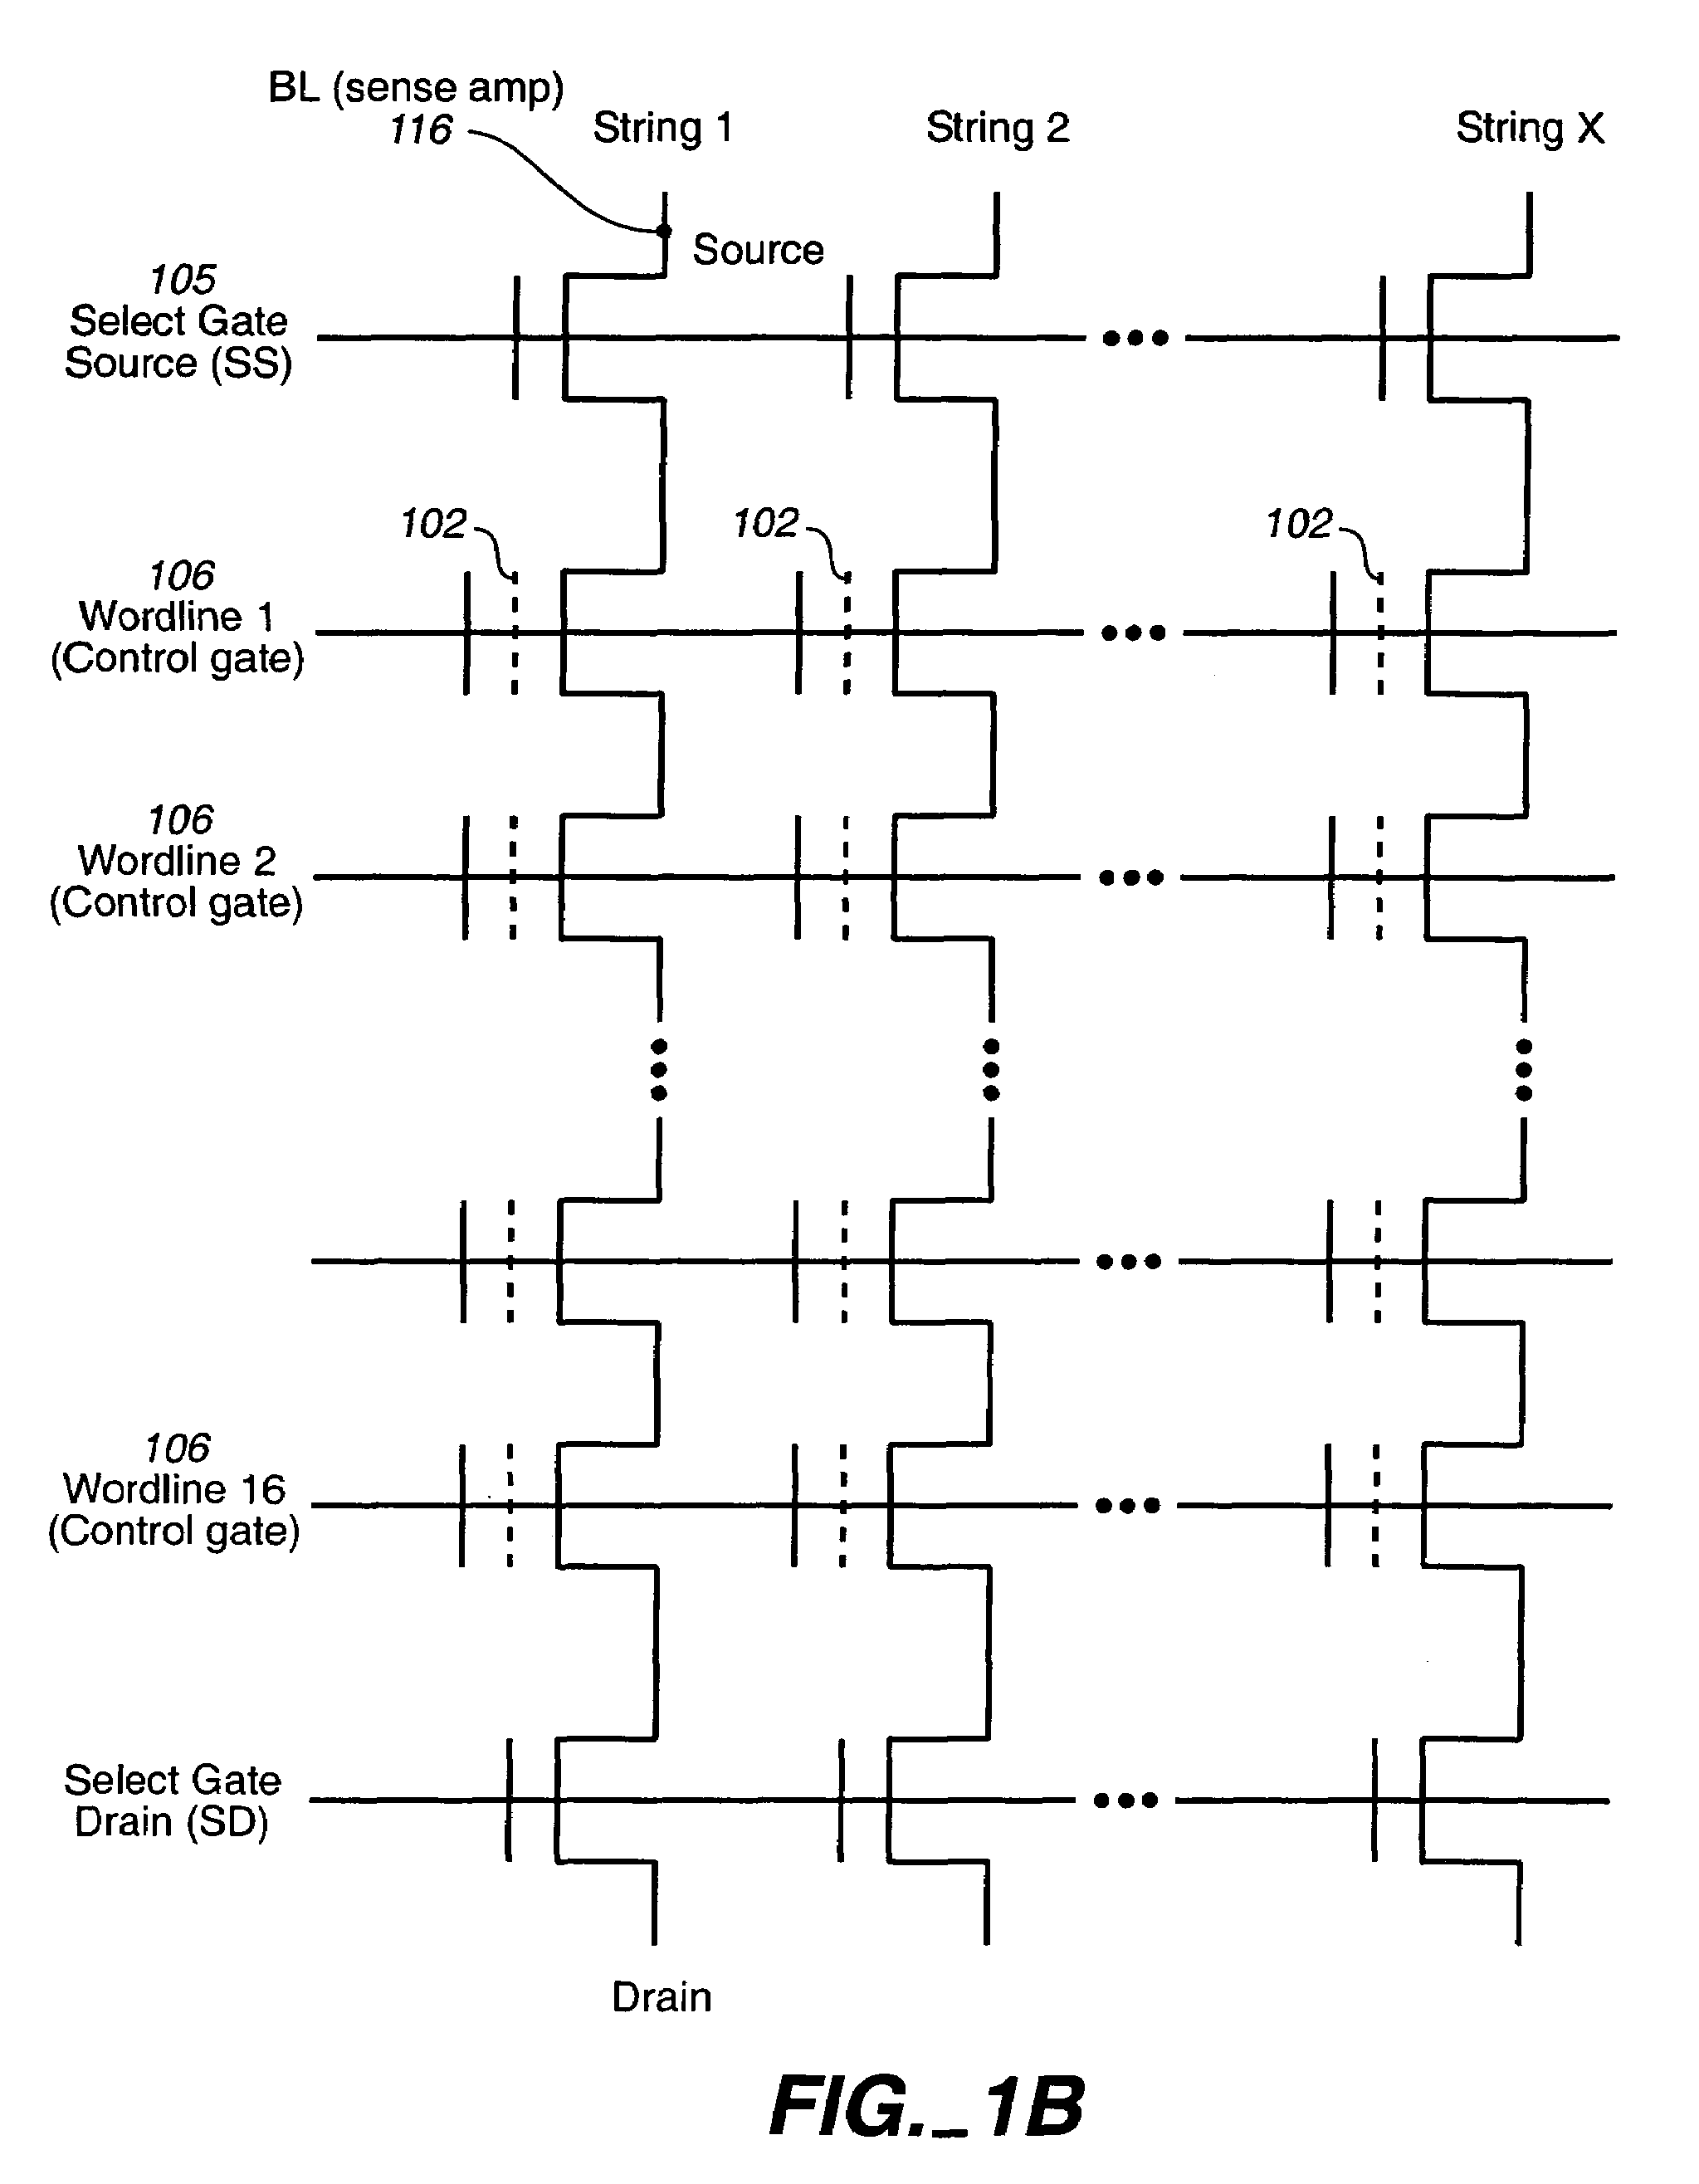 Deep wordline trench to shield cross coupling between adjacent cells for scaled NAND